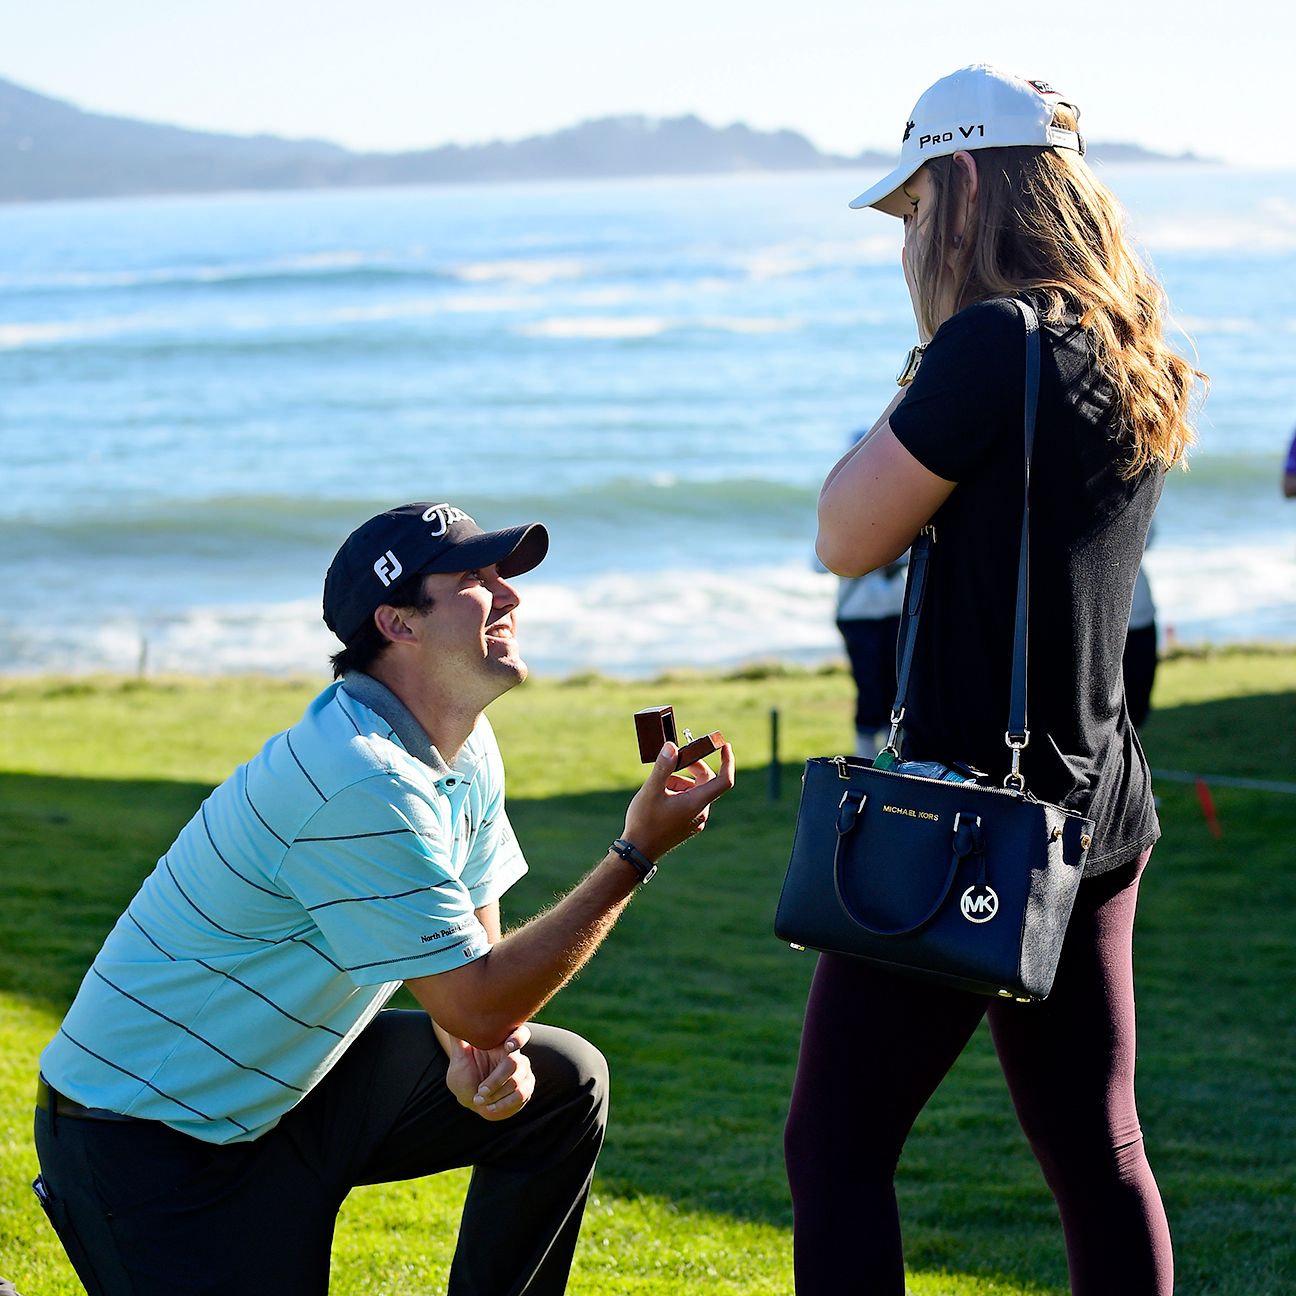 Rookie Mark Hubbard proposes to girlfriend on 18th hole at Pebble Beach